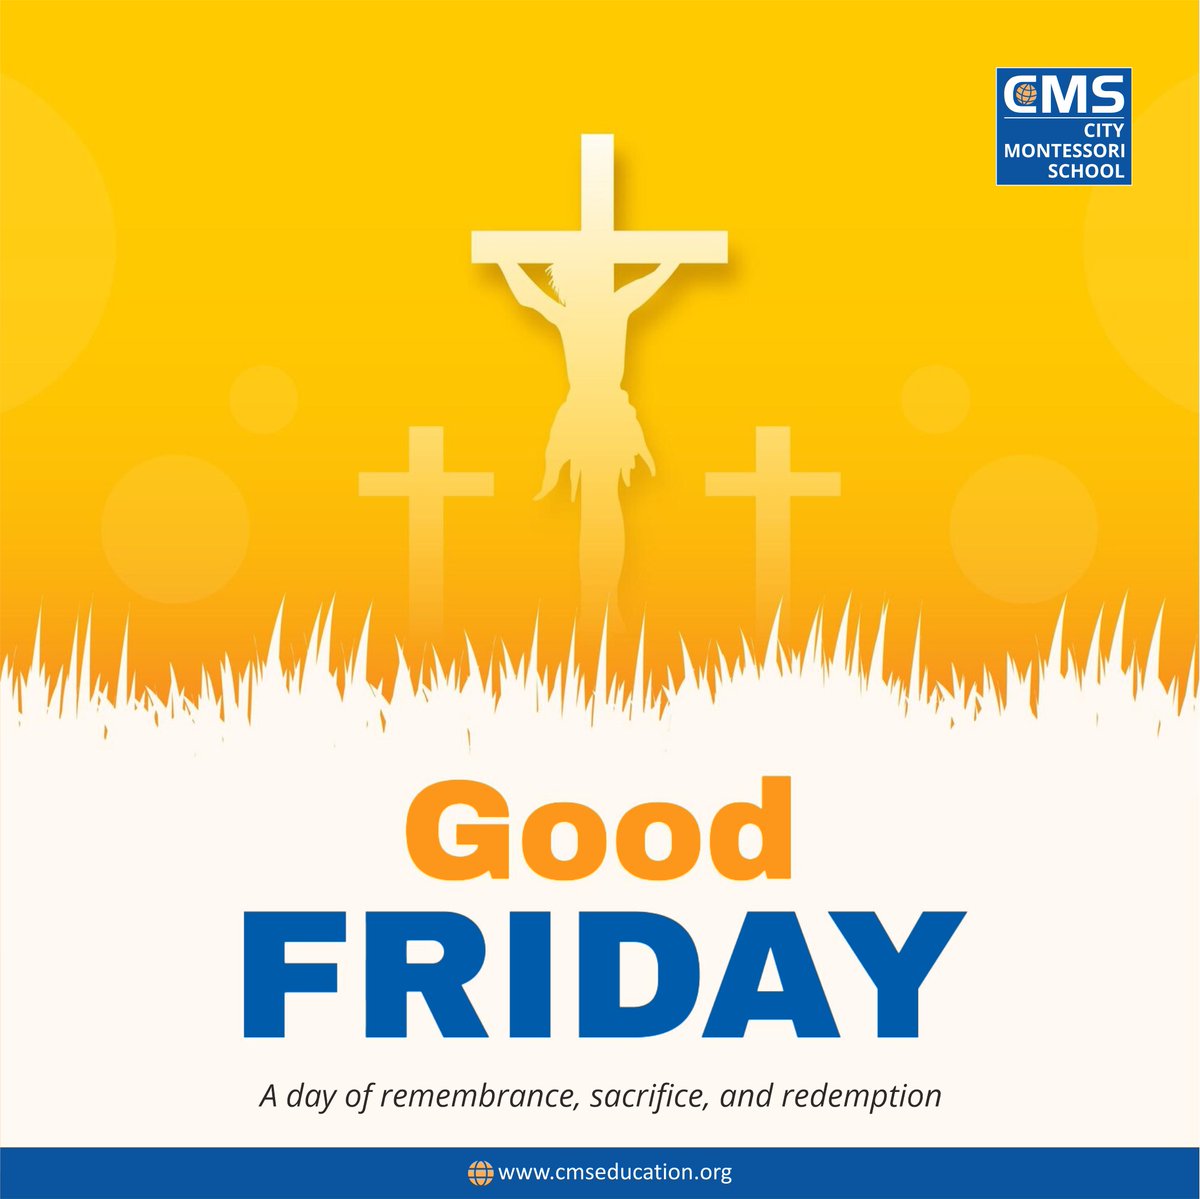 May the solemn observance of Good Friday remind us of the ultimate sacrifice and boundless love.  

Wishing you a day of reflection, grace, and renewal.   

#CMS #CMSeducation #CMSStudents #InspiringLeaders #HighAchiever #CMSActivity #GoodFriday #Faith #Love